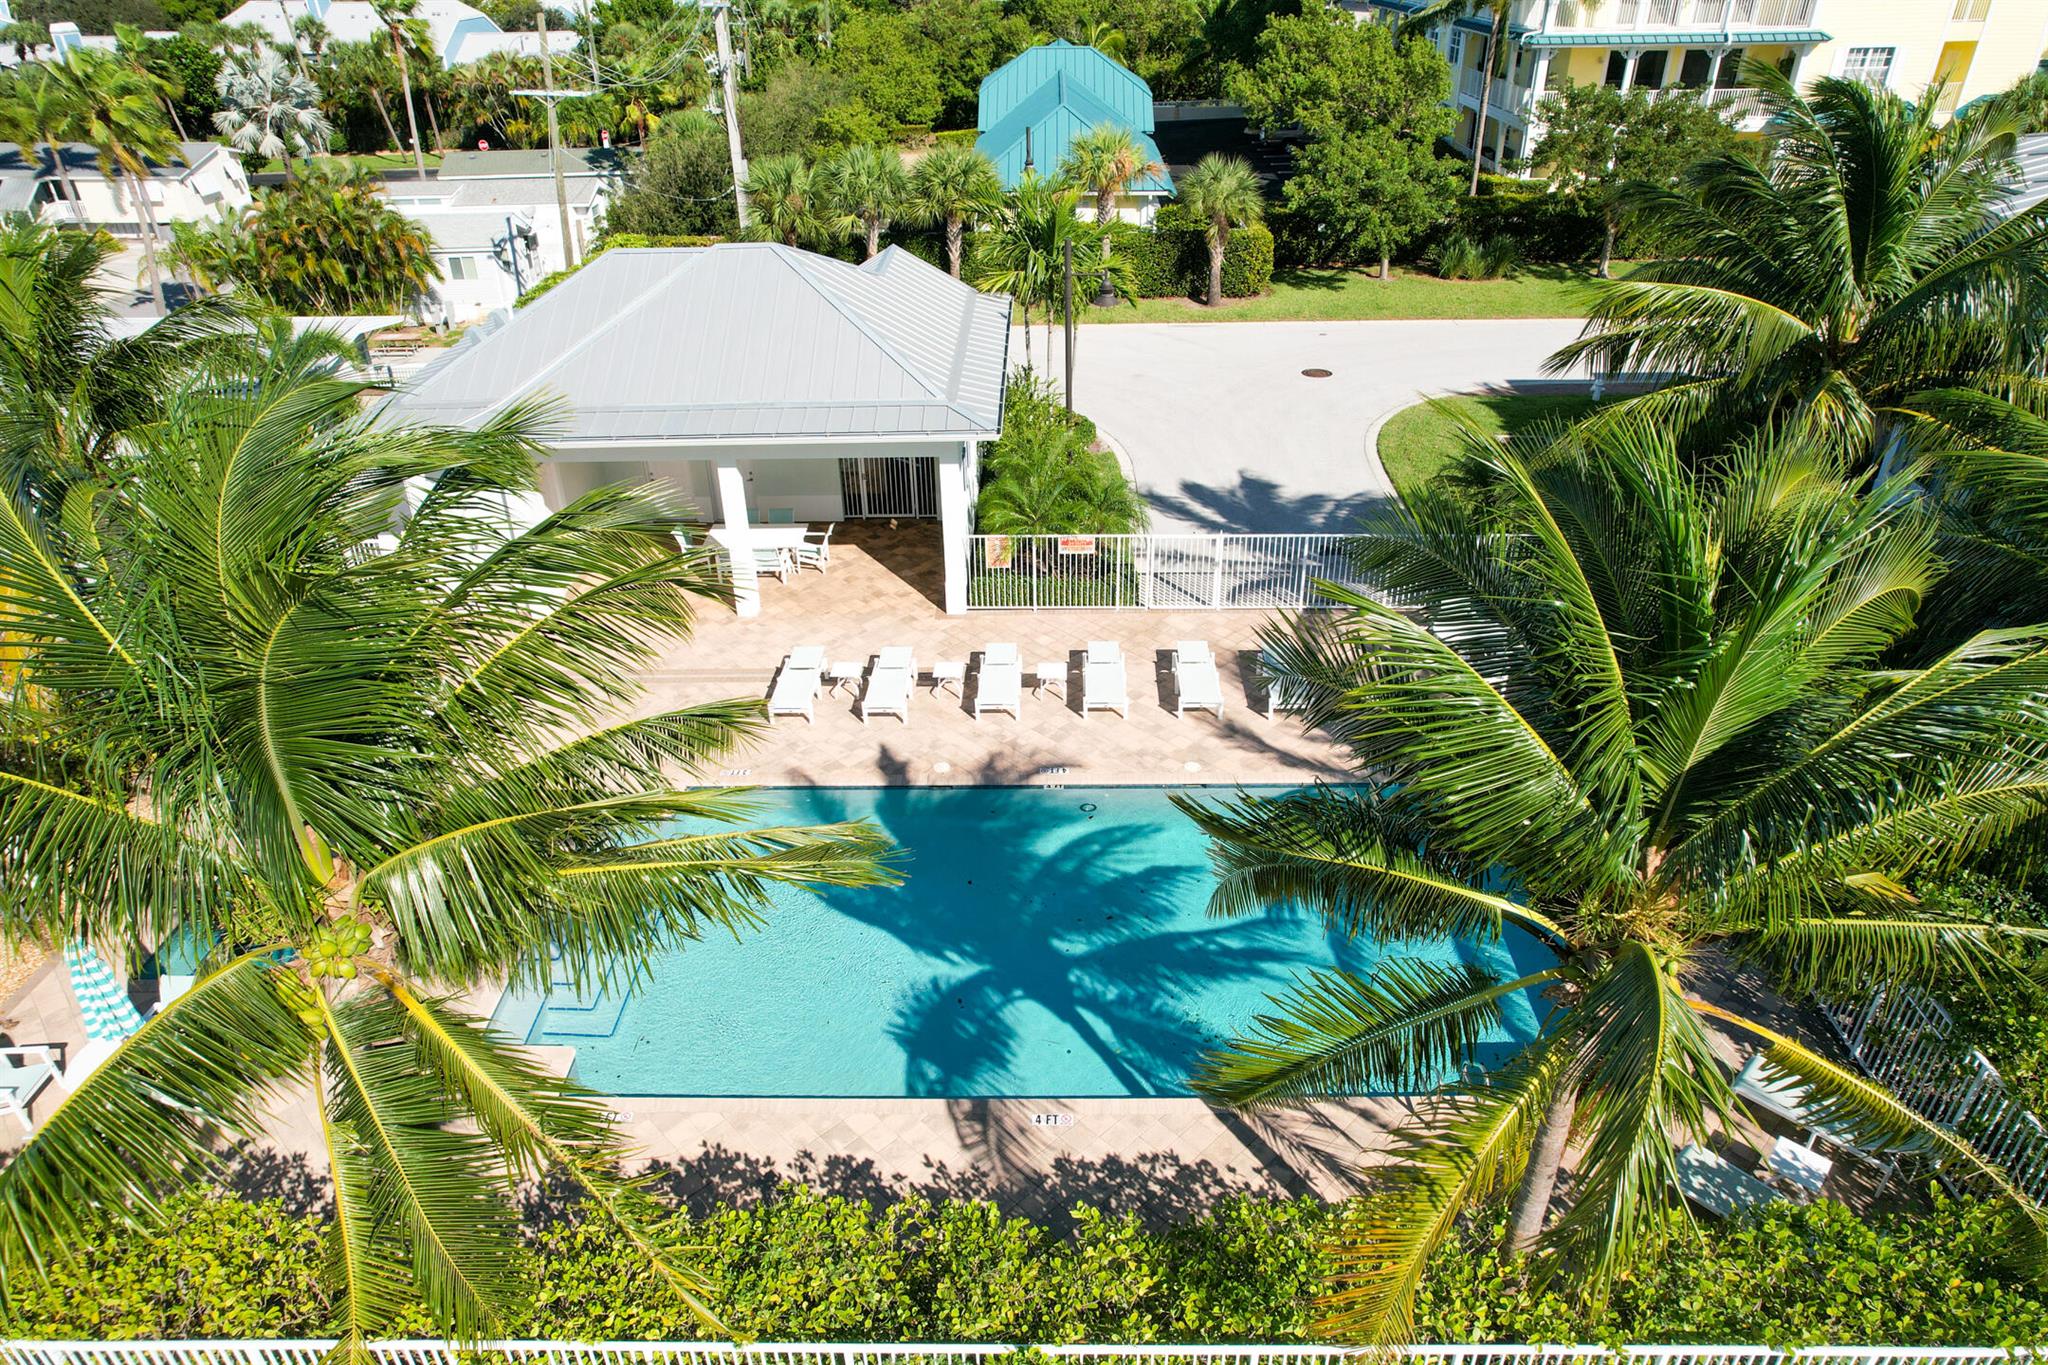 Just steps from the ocean and Juno Beach Pier, this modern Key West style townhome built in 2017 boasts high ceilings, 3 bedrooms, 2.5 baths, 2 car garage, metal roof, impact windows and doors, plantation shutters, designer upgrades and much more. The developer installed special soundproofing material within the walls to provide the comfort of a single family home. Ideally positioned within this charming community of Ocean Breeze with a total of only 24 homes and community pool - enjoy the lifestyle that only Juno Beach & Jupiter can offer!